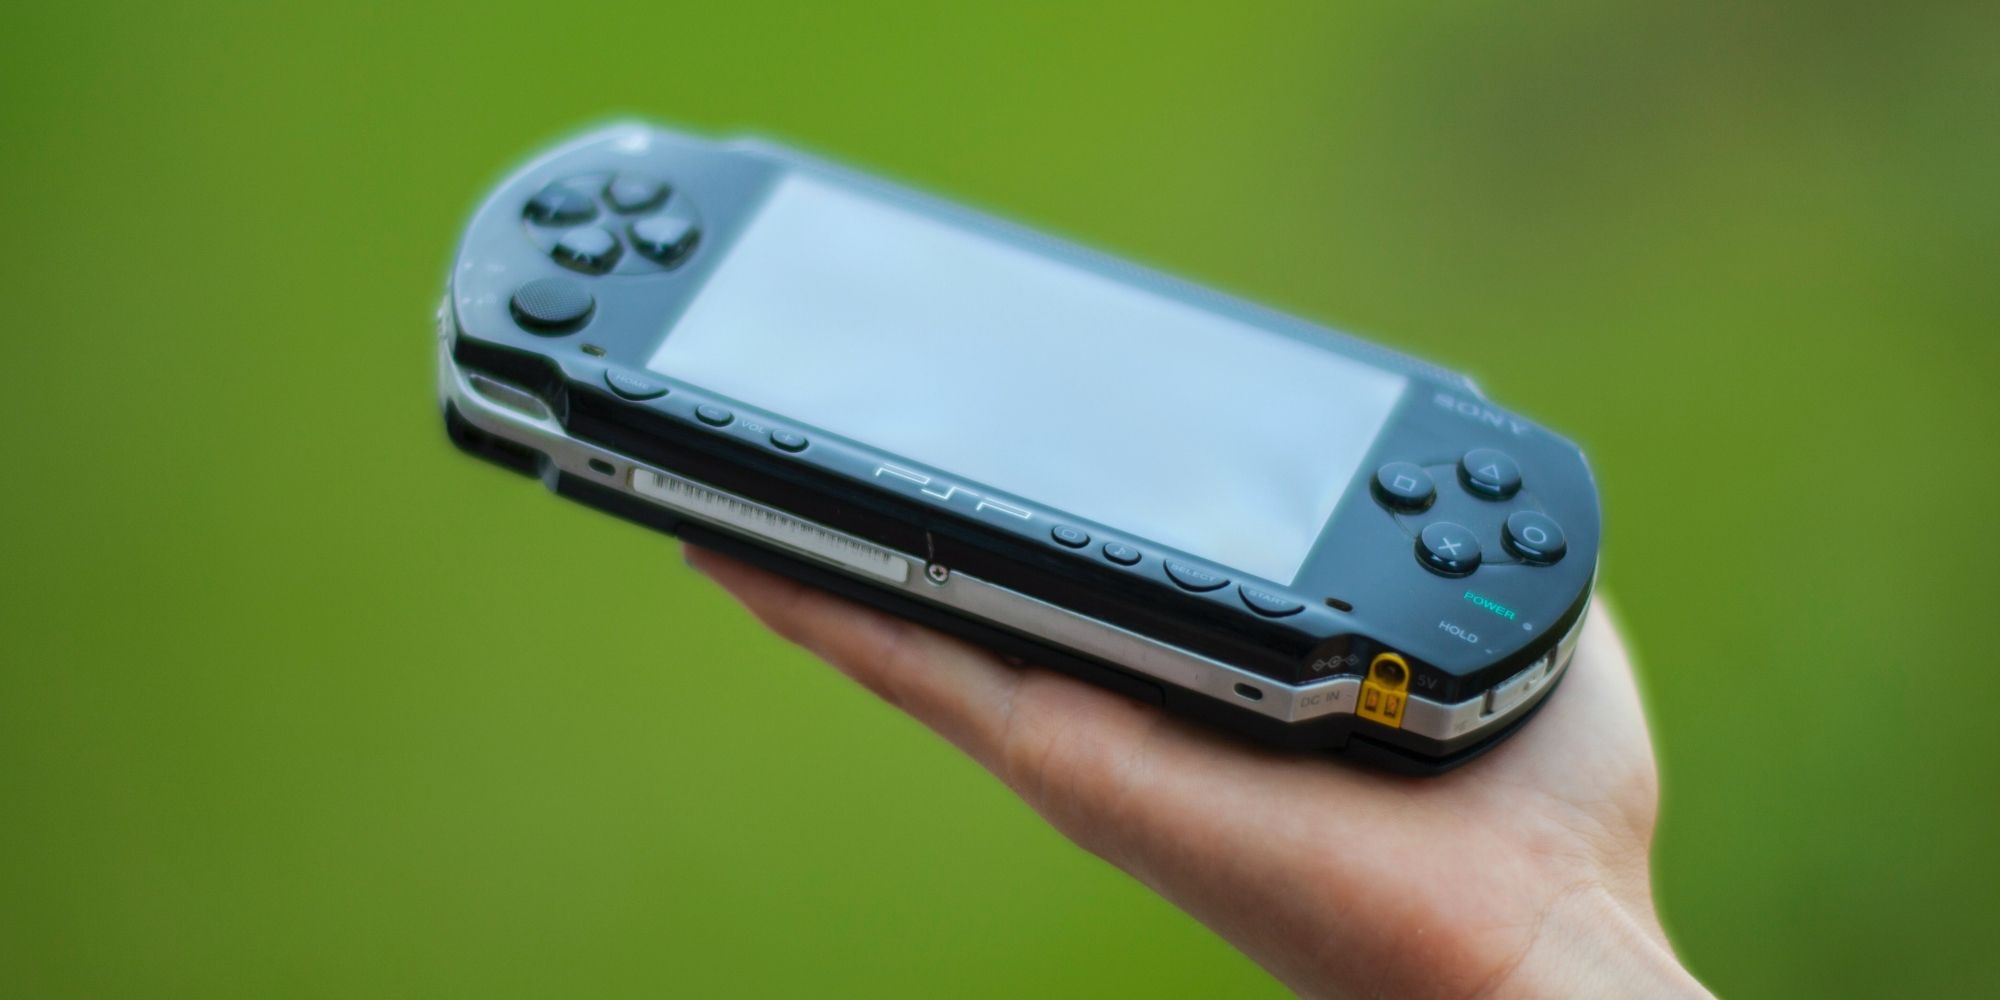 about playstation portable